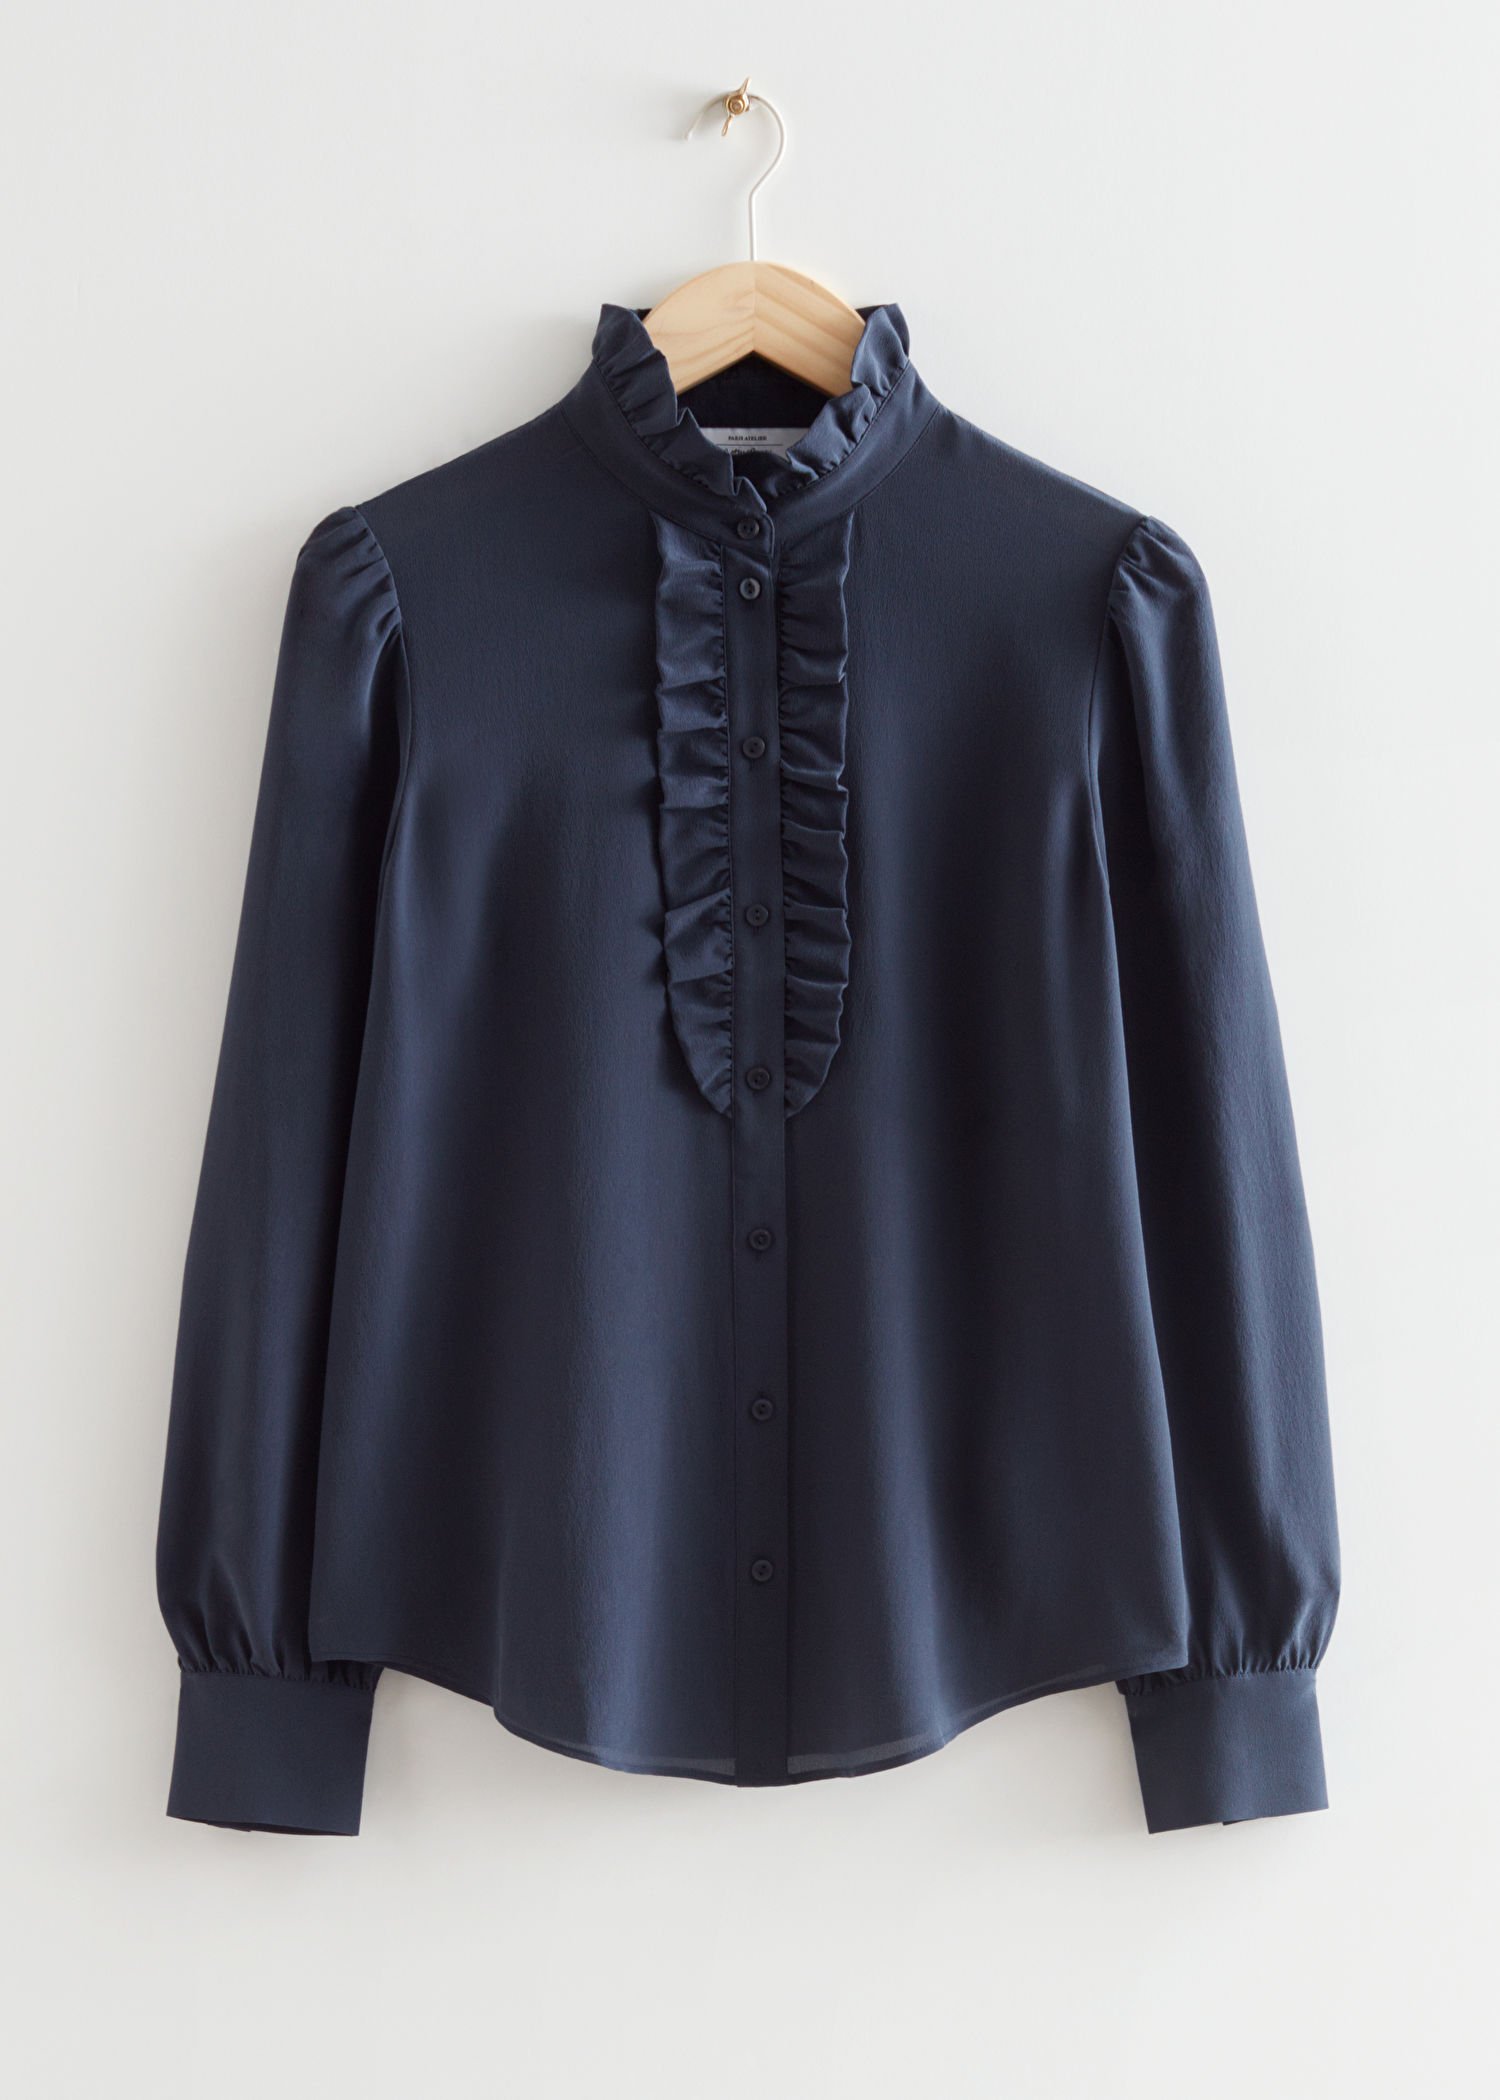 & Other Stories Frilled Silk Blouse in Navy.jpg